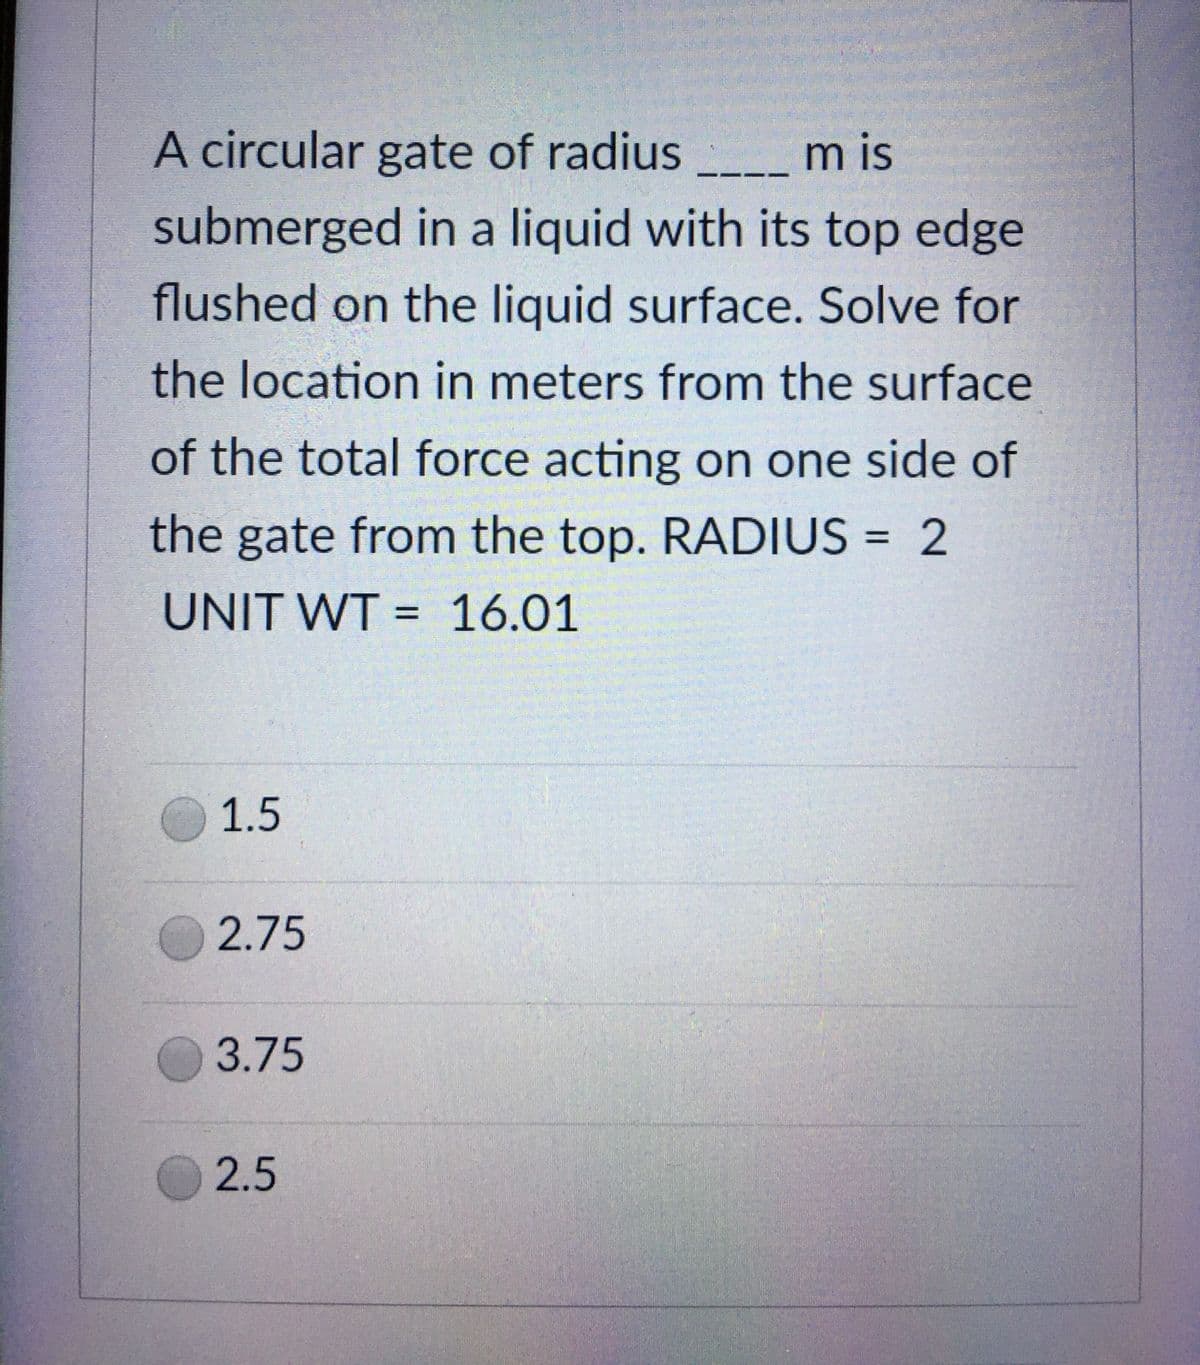 A circular gate of radius
mis
-
submerged in a liquid with its top edge
flushed on the liquid surface. Solve for
the location in meters from the surface
of the total force acting on one side of
the gate from the top. RADIUS = 2
UNIT WT = 16.01
1.5
2.75
3.75
2.5